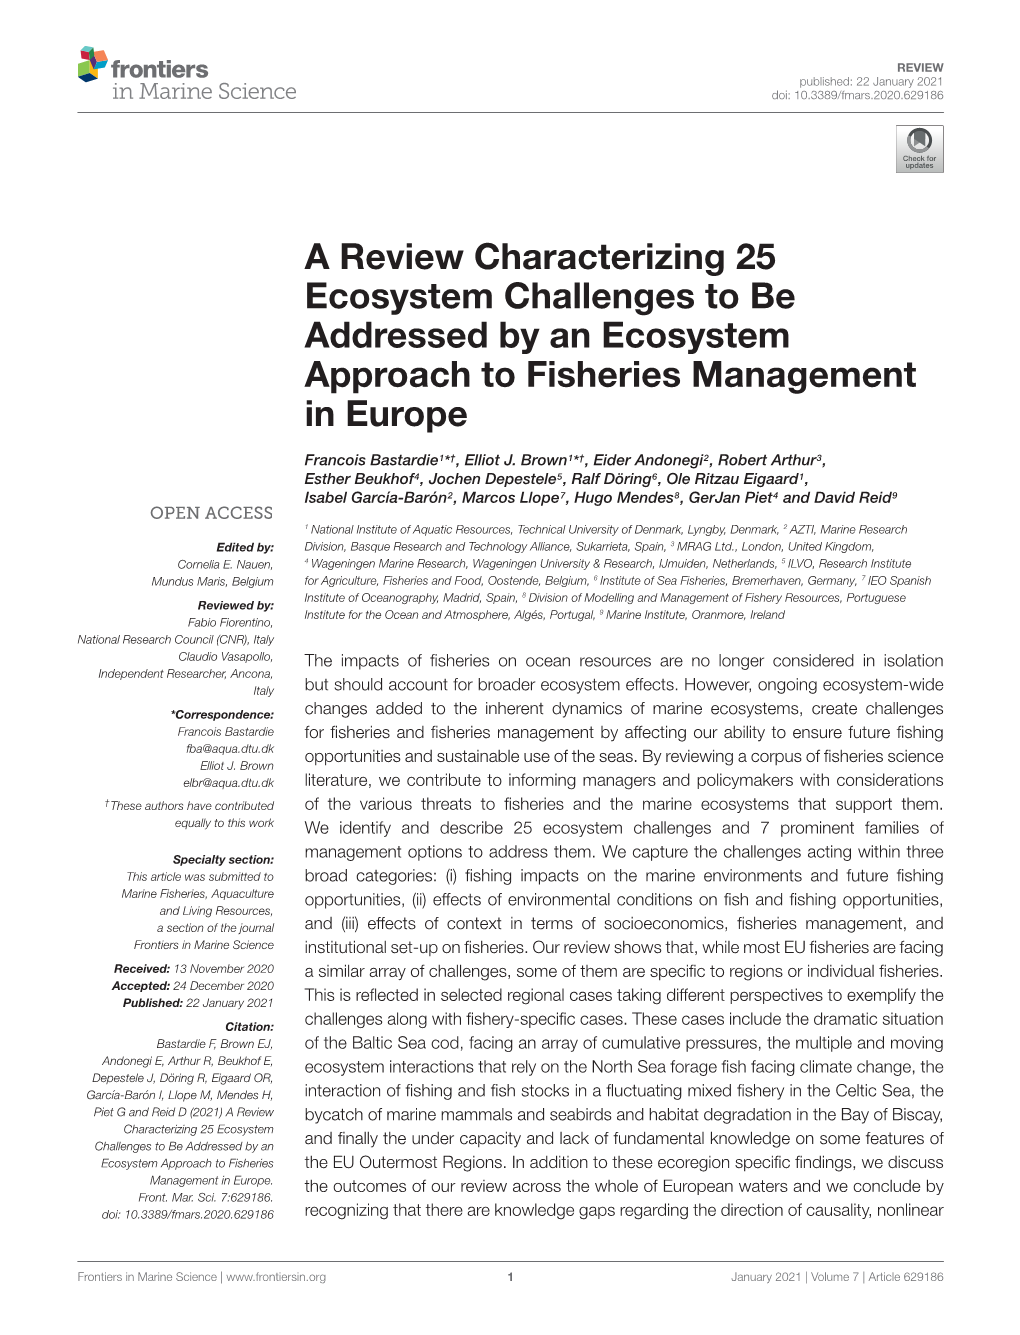 A Review Characterizing 25 Ecosystem Challenges to Be Addressed by an Ecosystem Approach to Fisheries Management in Europe